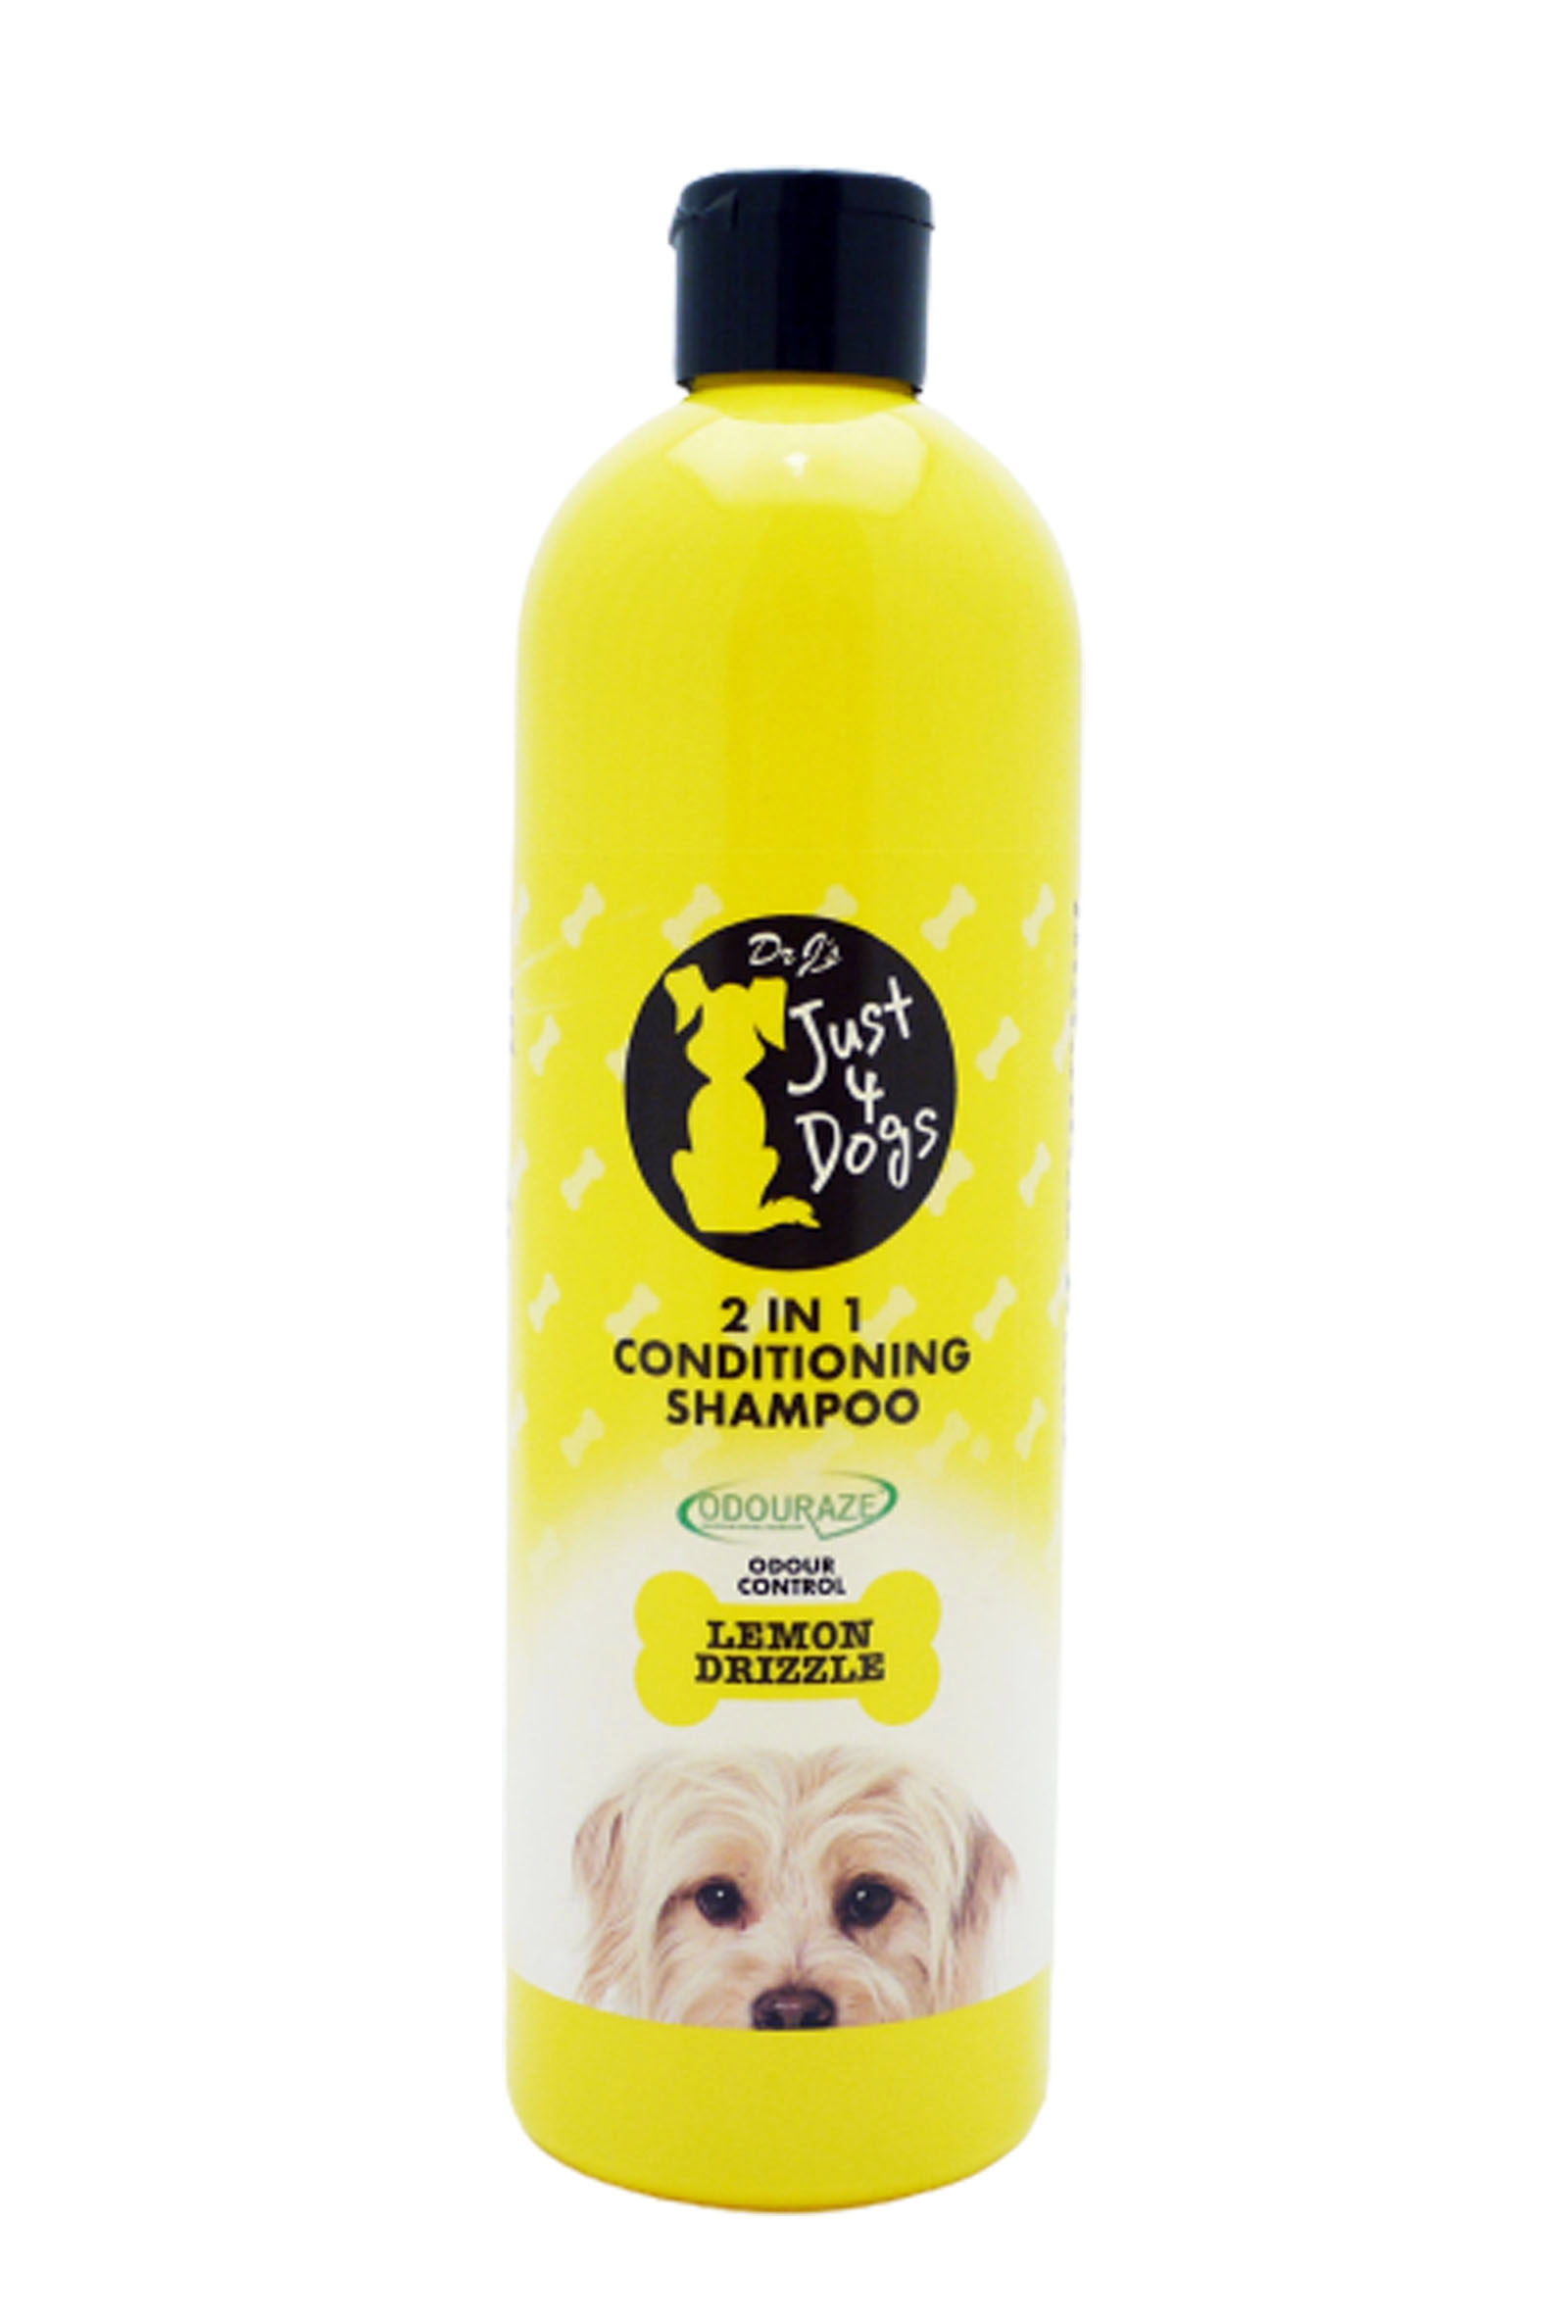 Just 4 Dogs Shampoo and conditioner for dogs Lemon Dazzle 500ml 